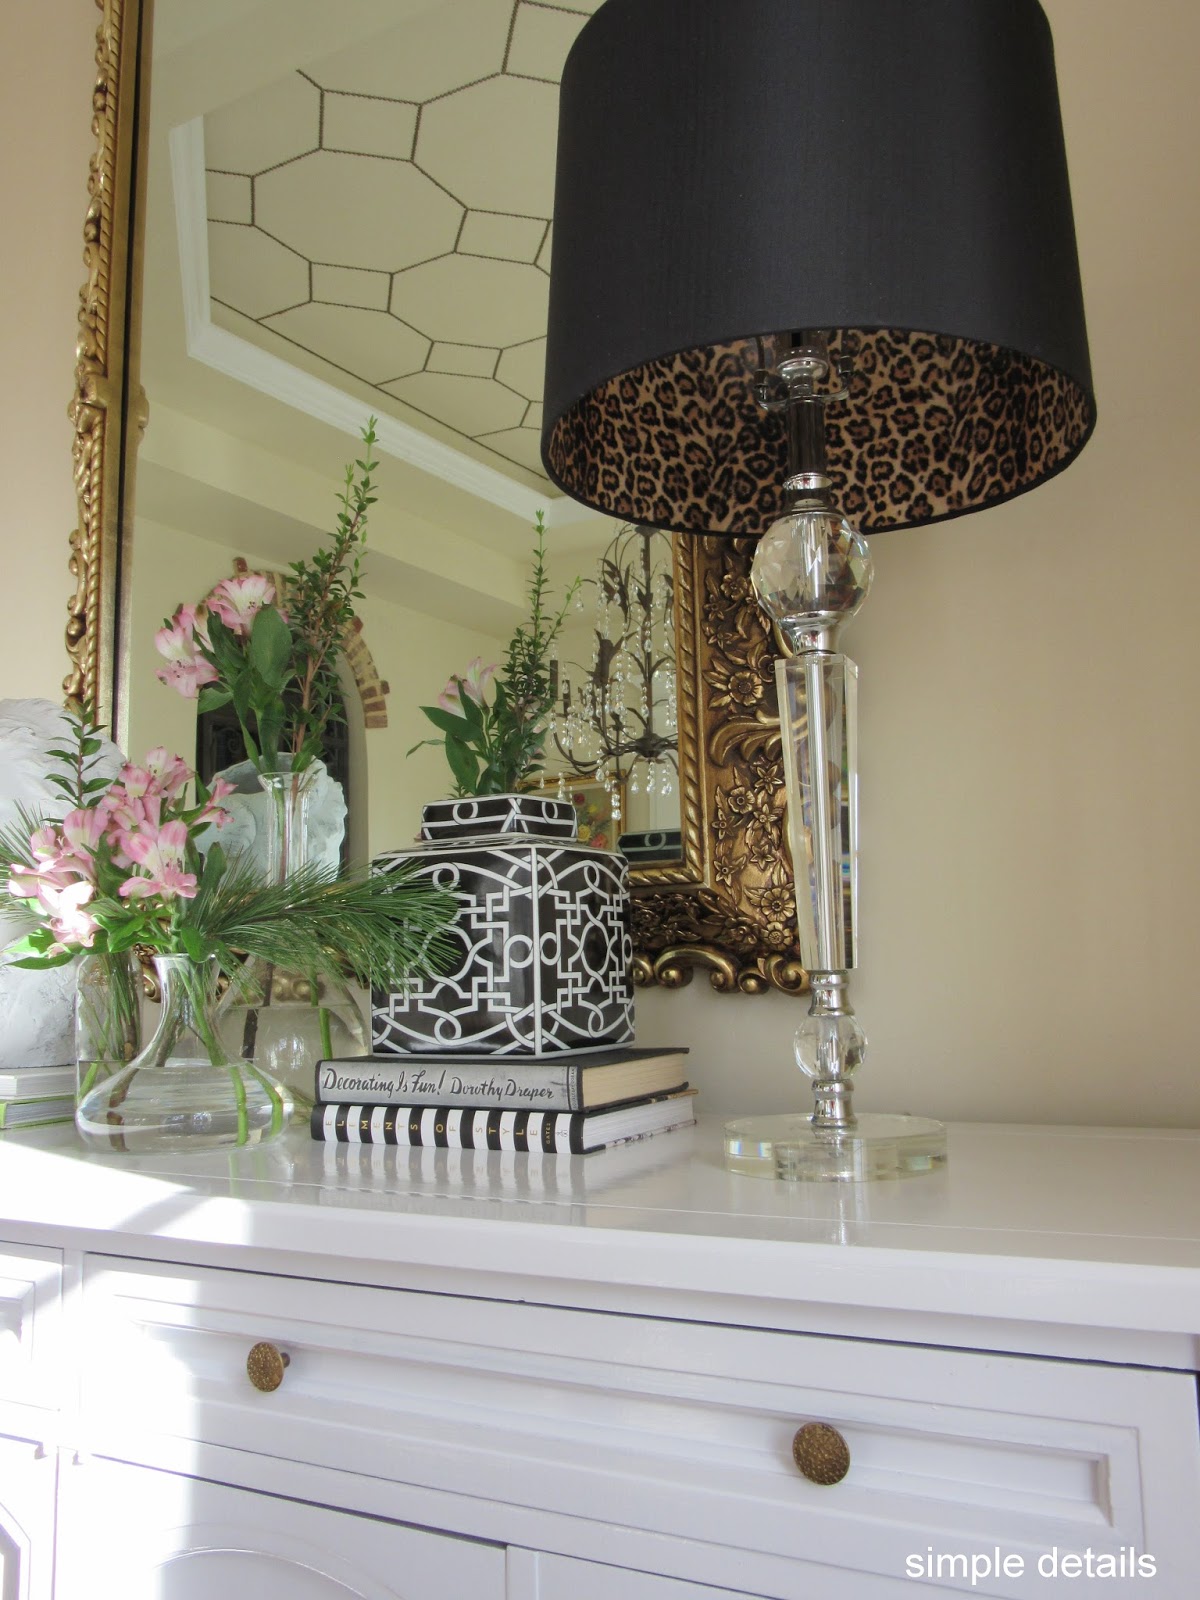 Simple Details: DIY Lamp Shade with Leopard Print Lining